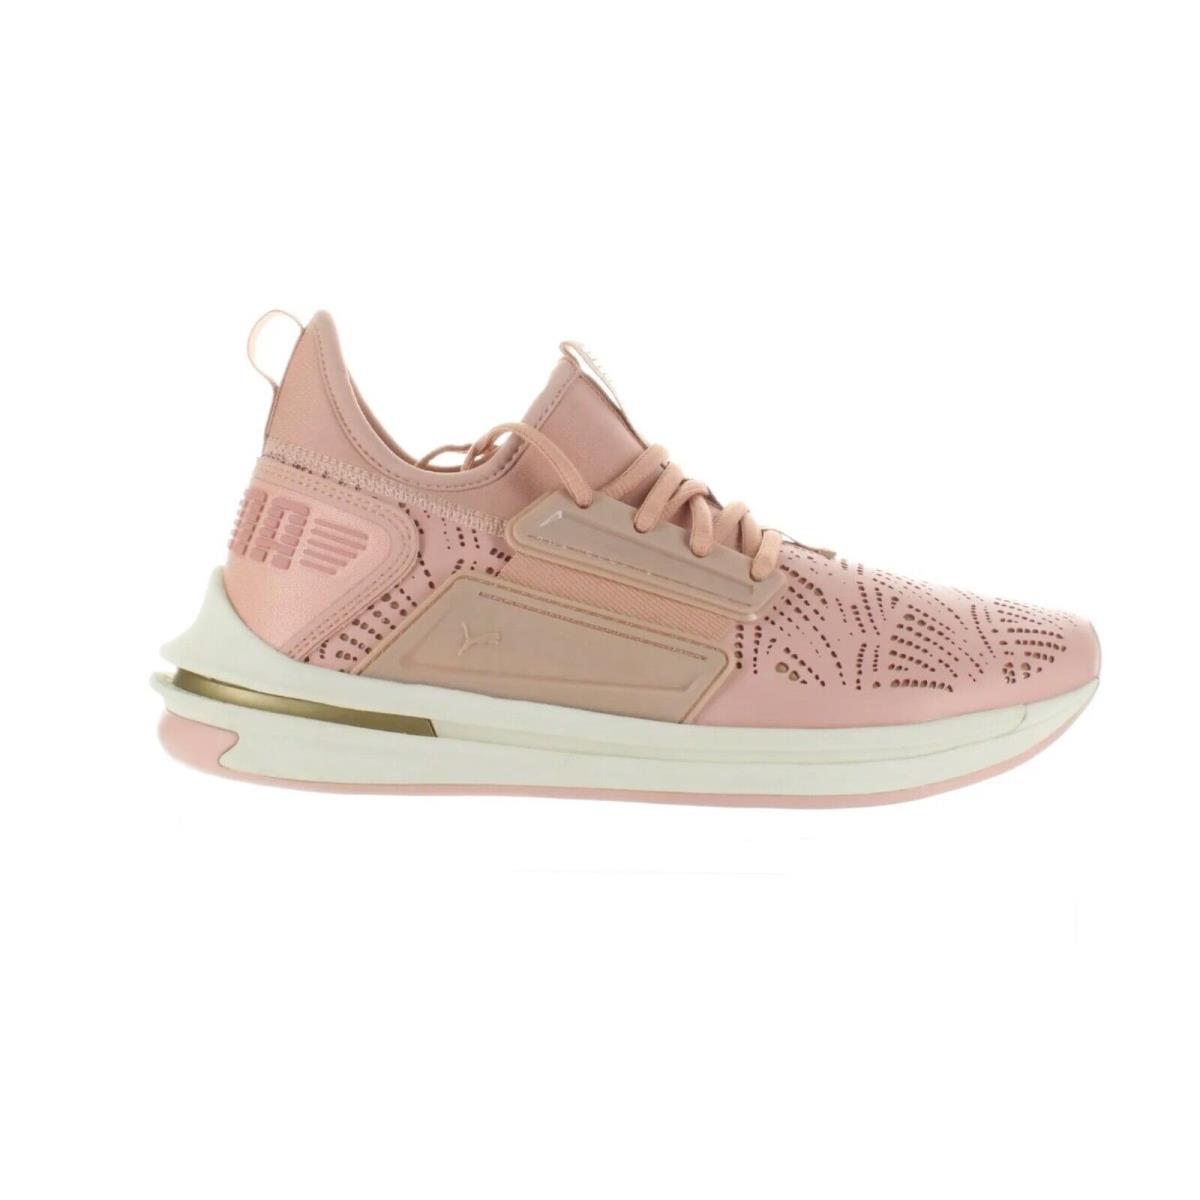 Puma Ignite Limitless Women`s Pink Running Shoes Size US 9 25.5 cm